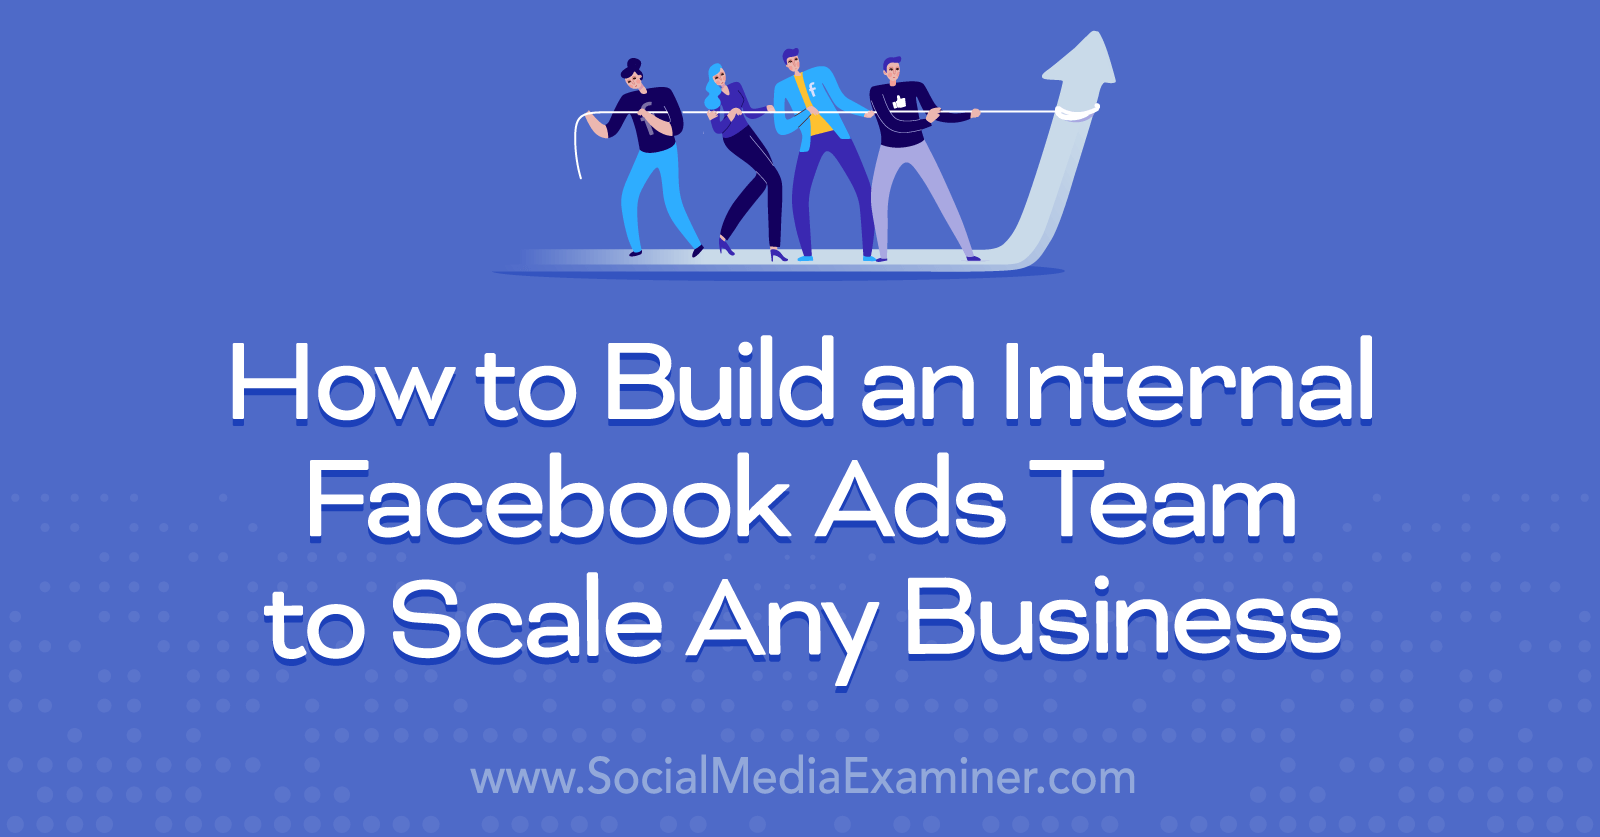 How to Build an Internal Facebook Ads Team to Scale Any Business by Social Media Examiner